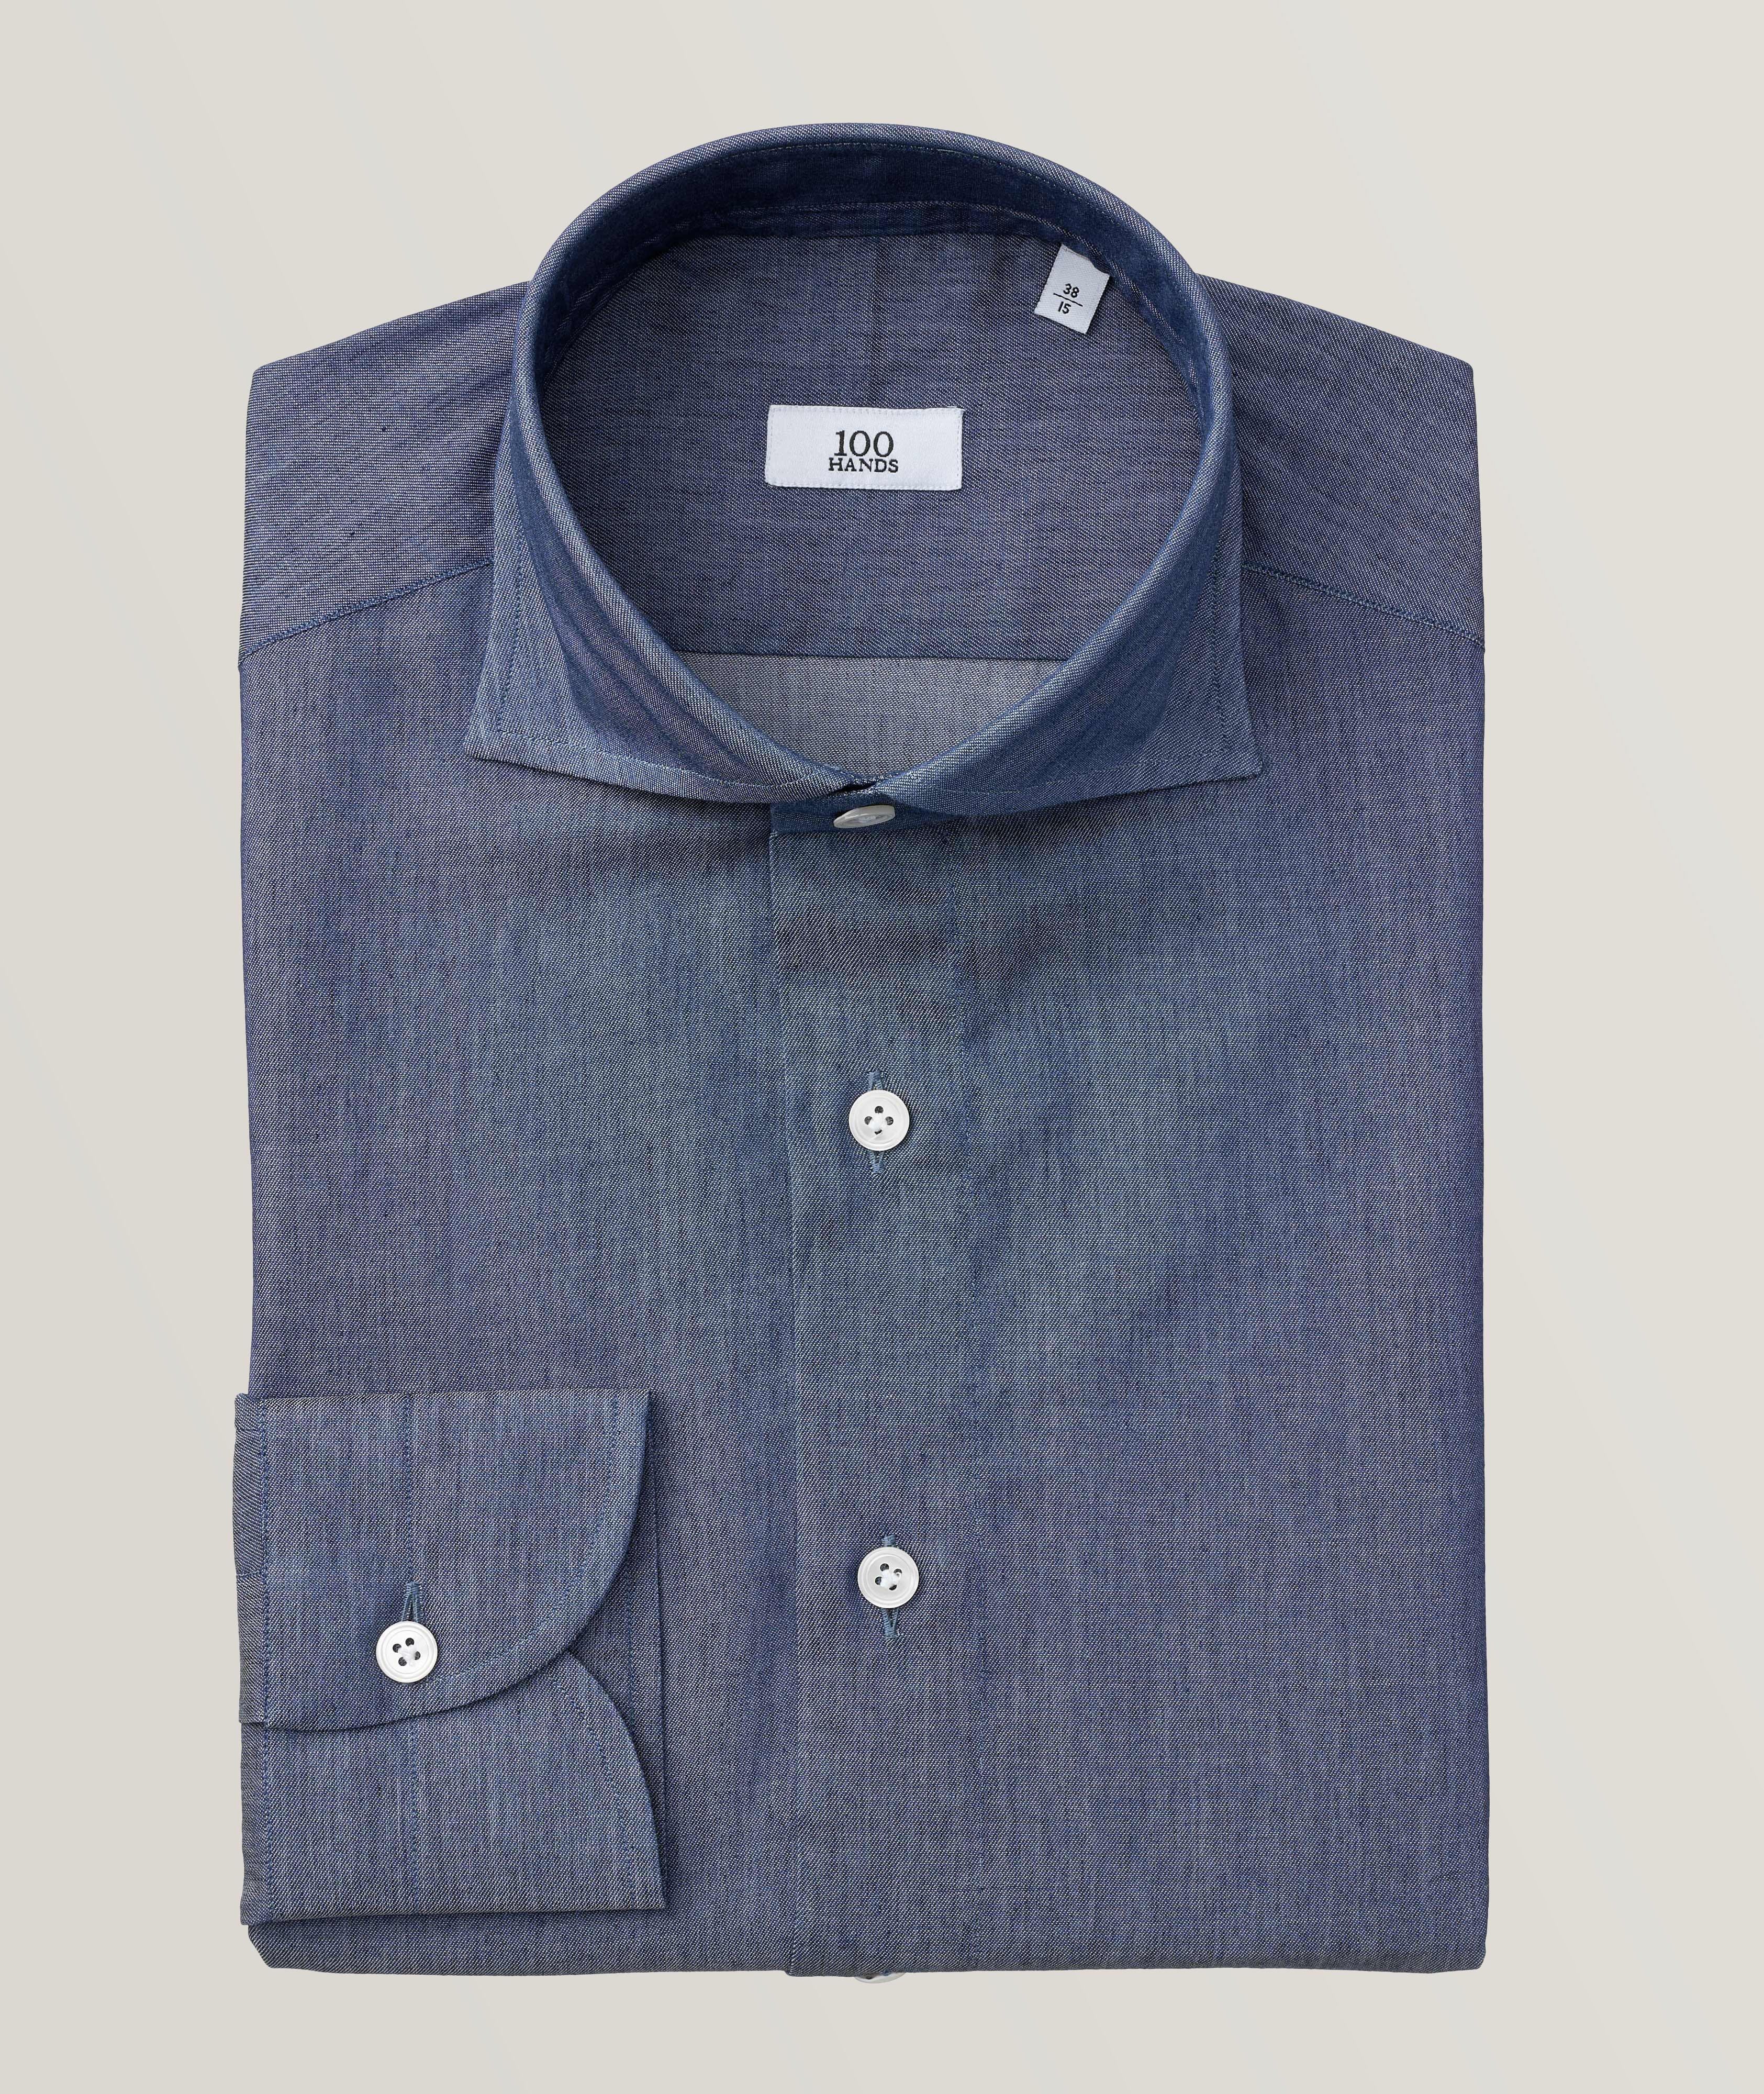 100 Hands Black Line Solid Chambray Dress Shirt